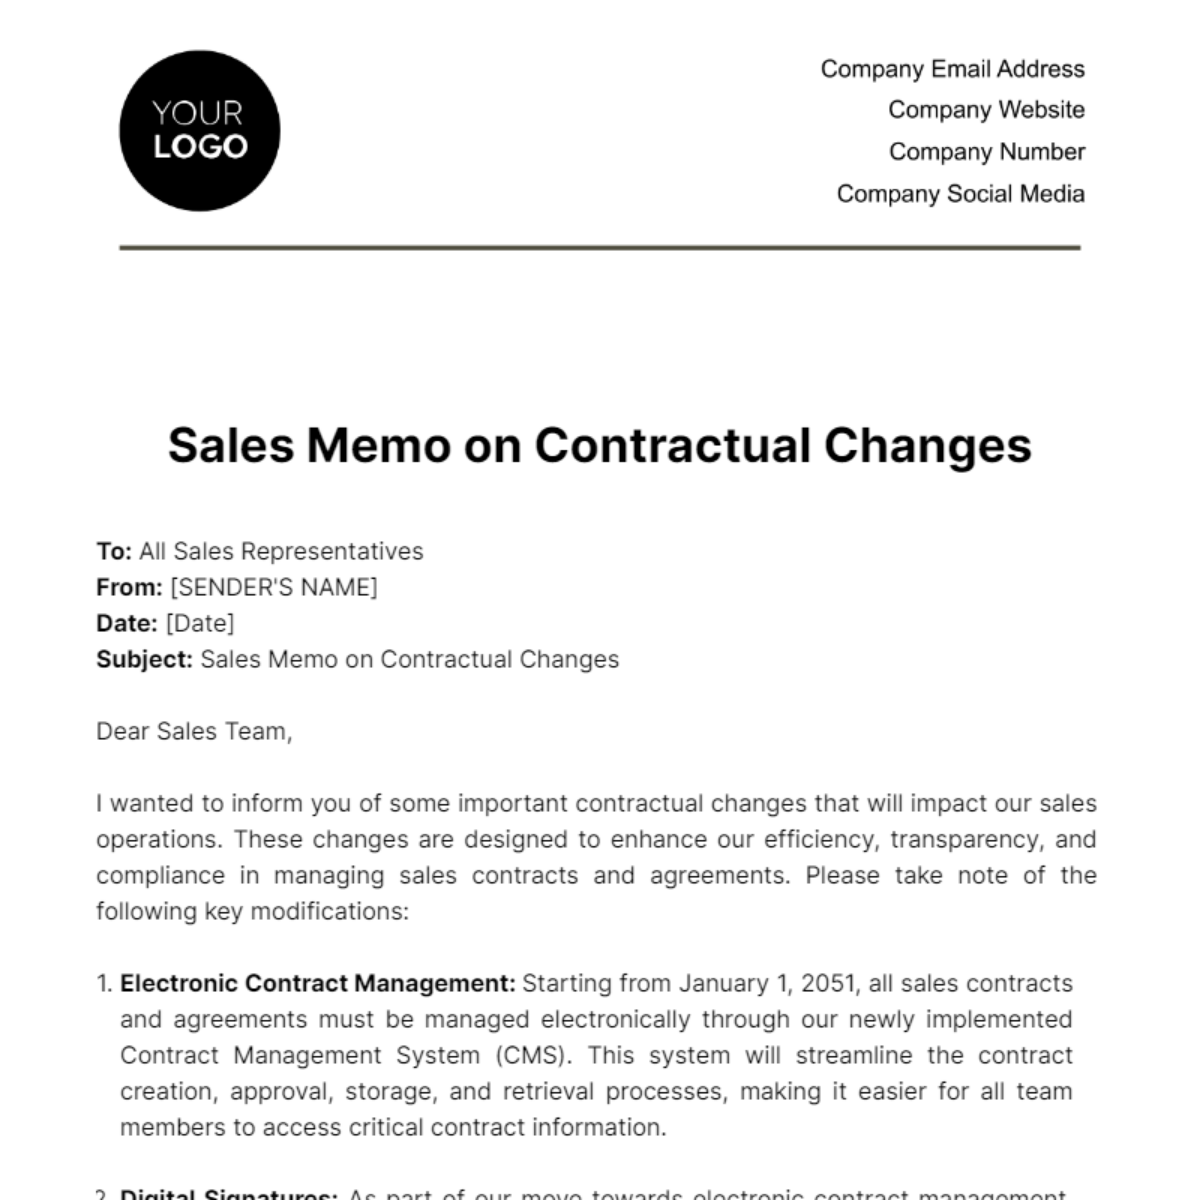 Free Sales Memo on Contractual Changes Template